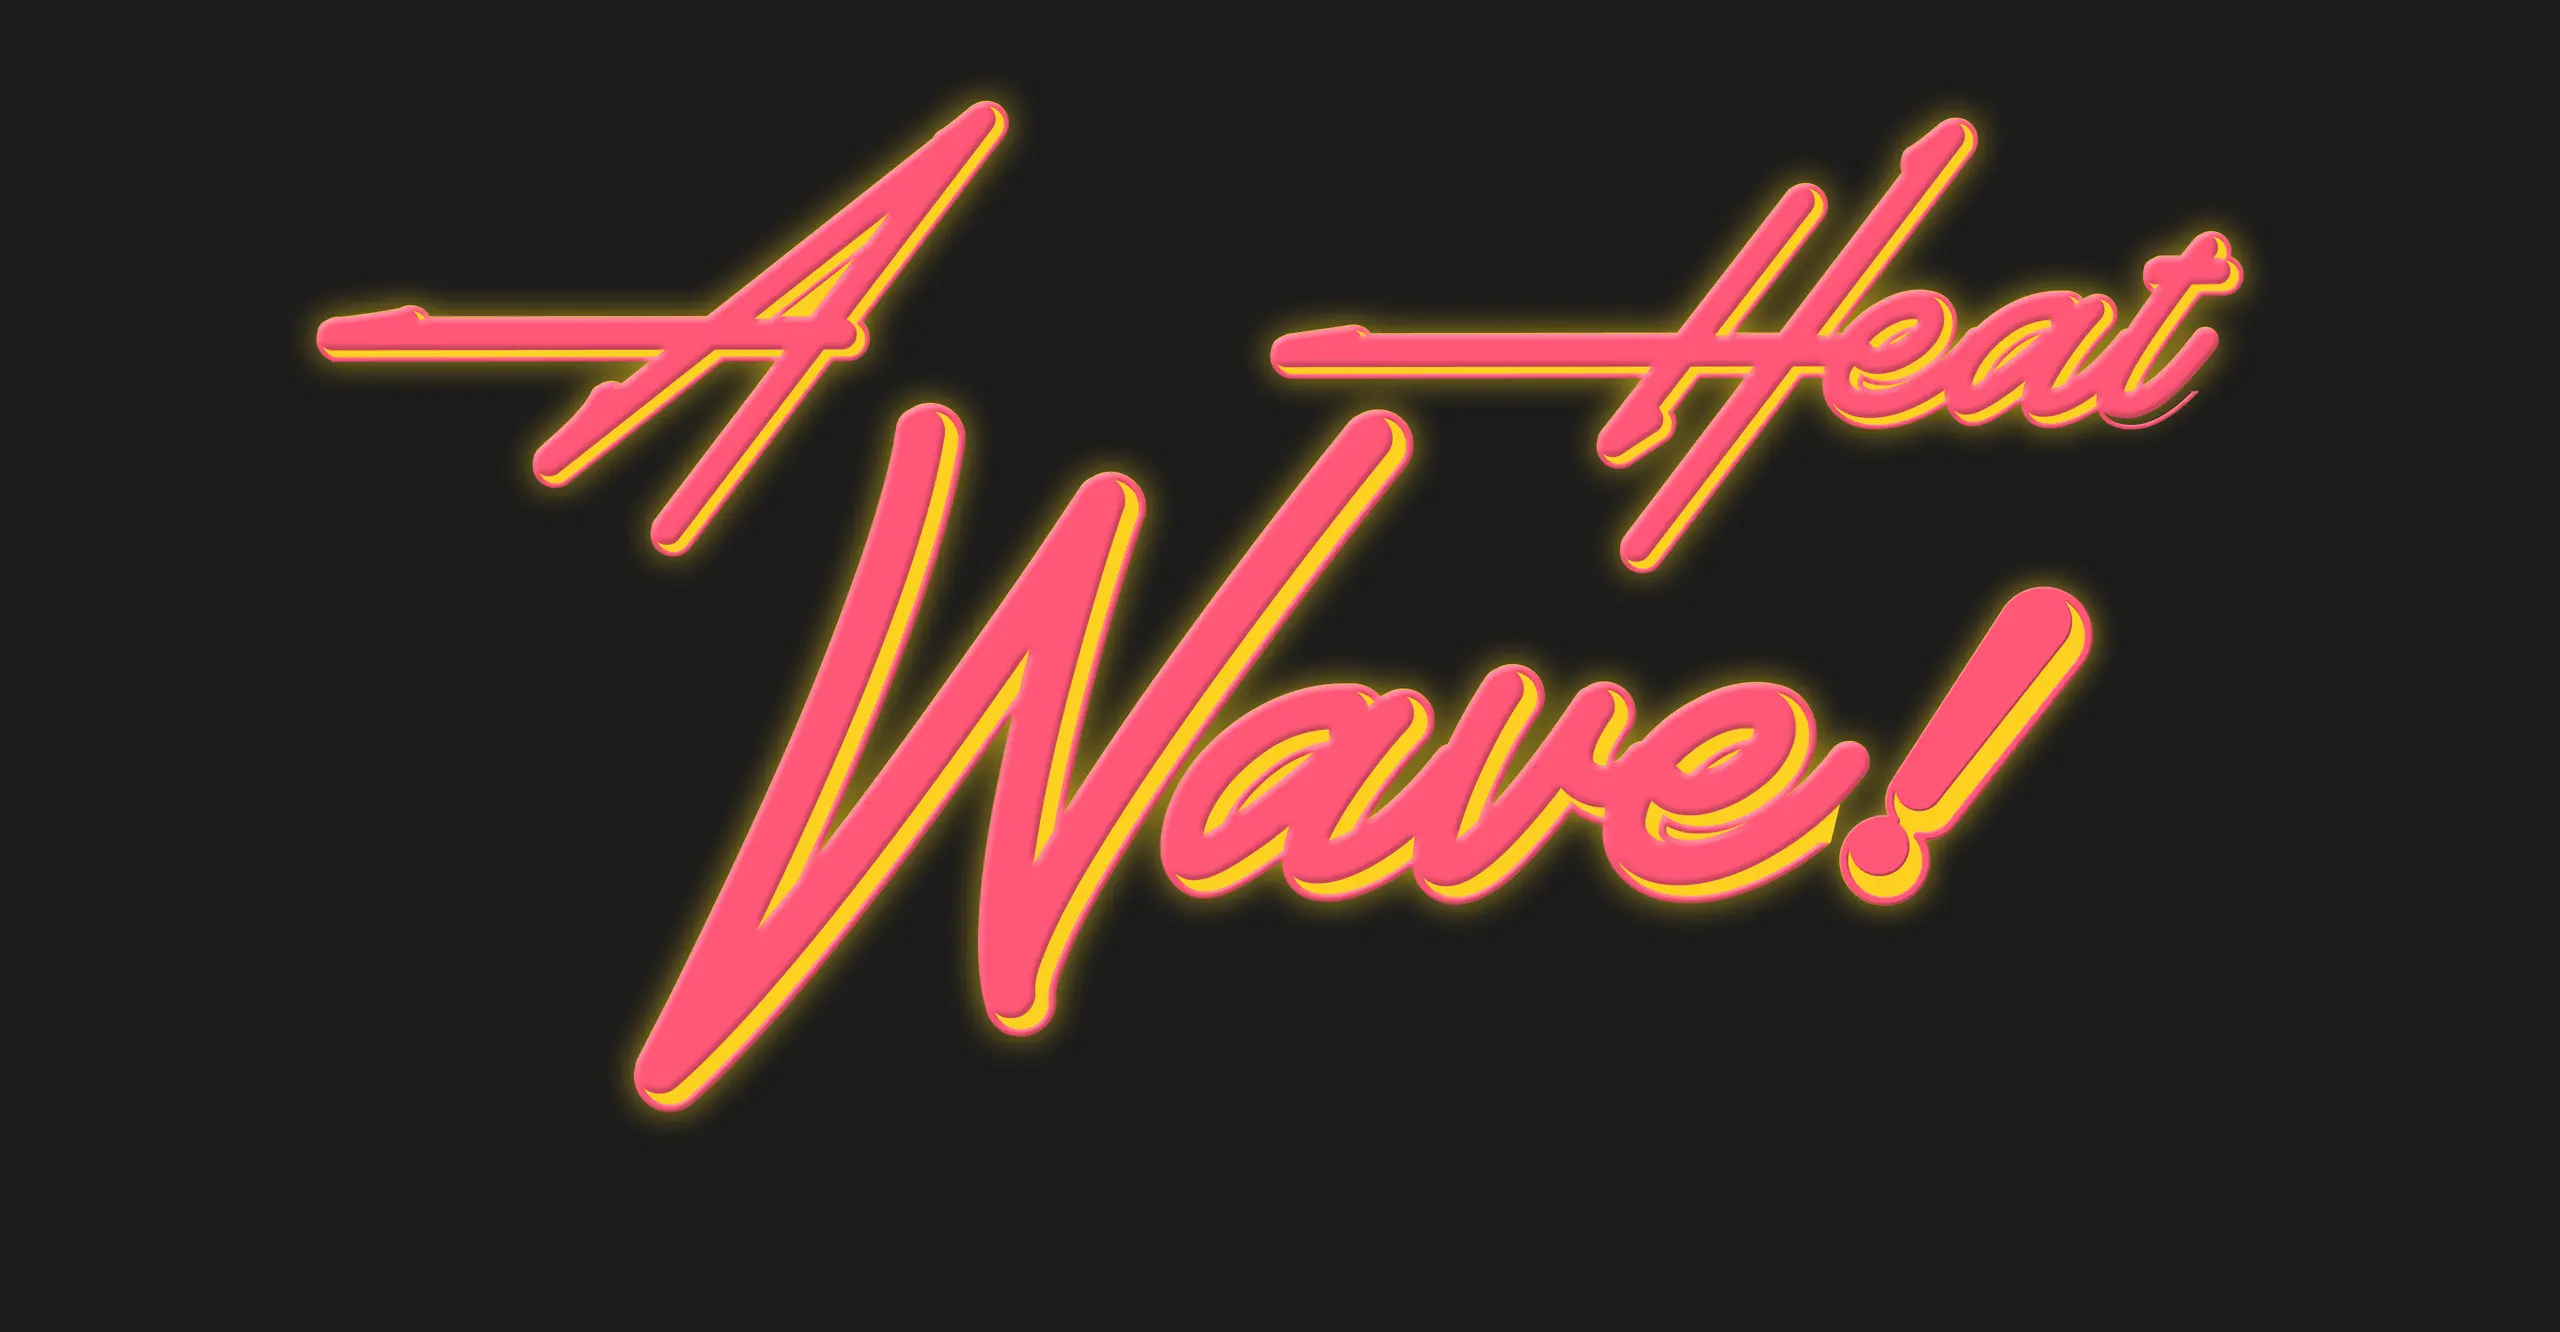 A graphic on black background saying "A Heat Wave" in bright colours